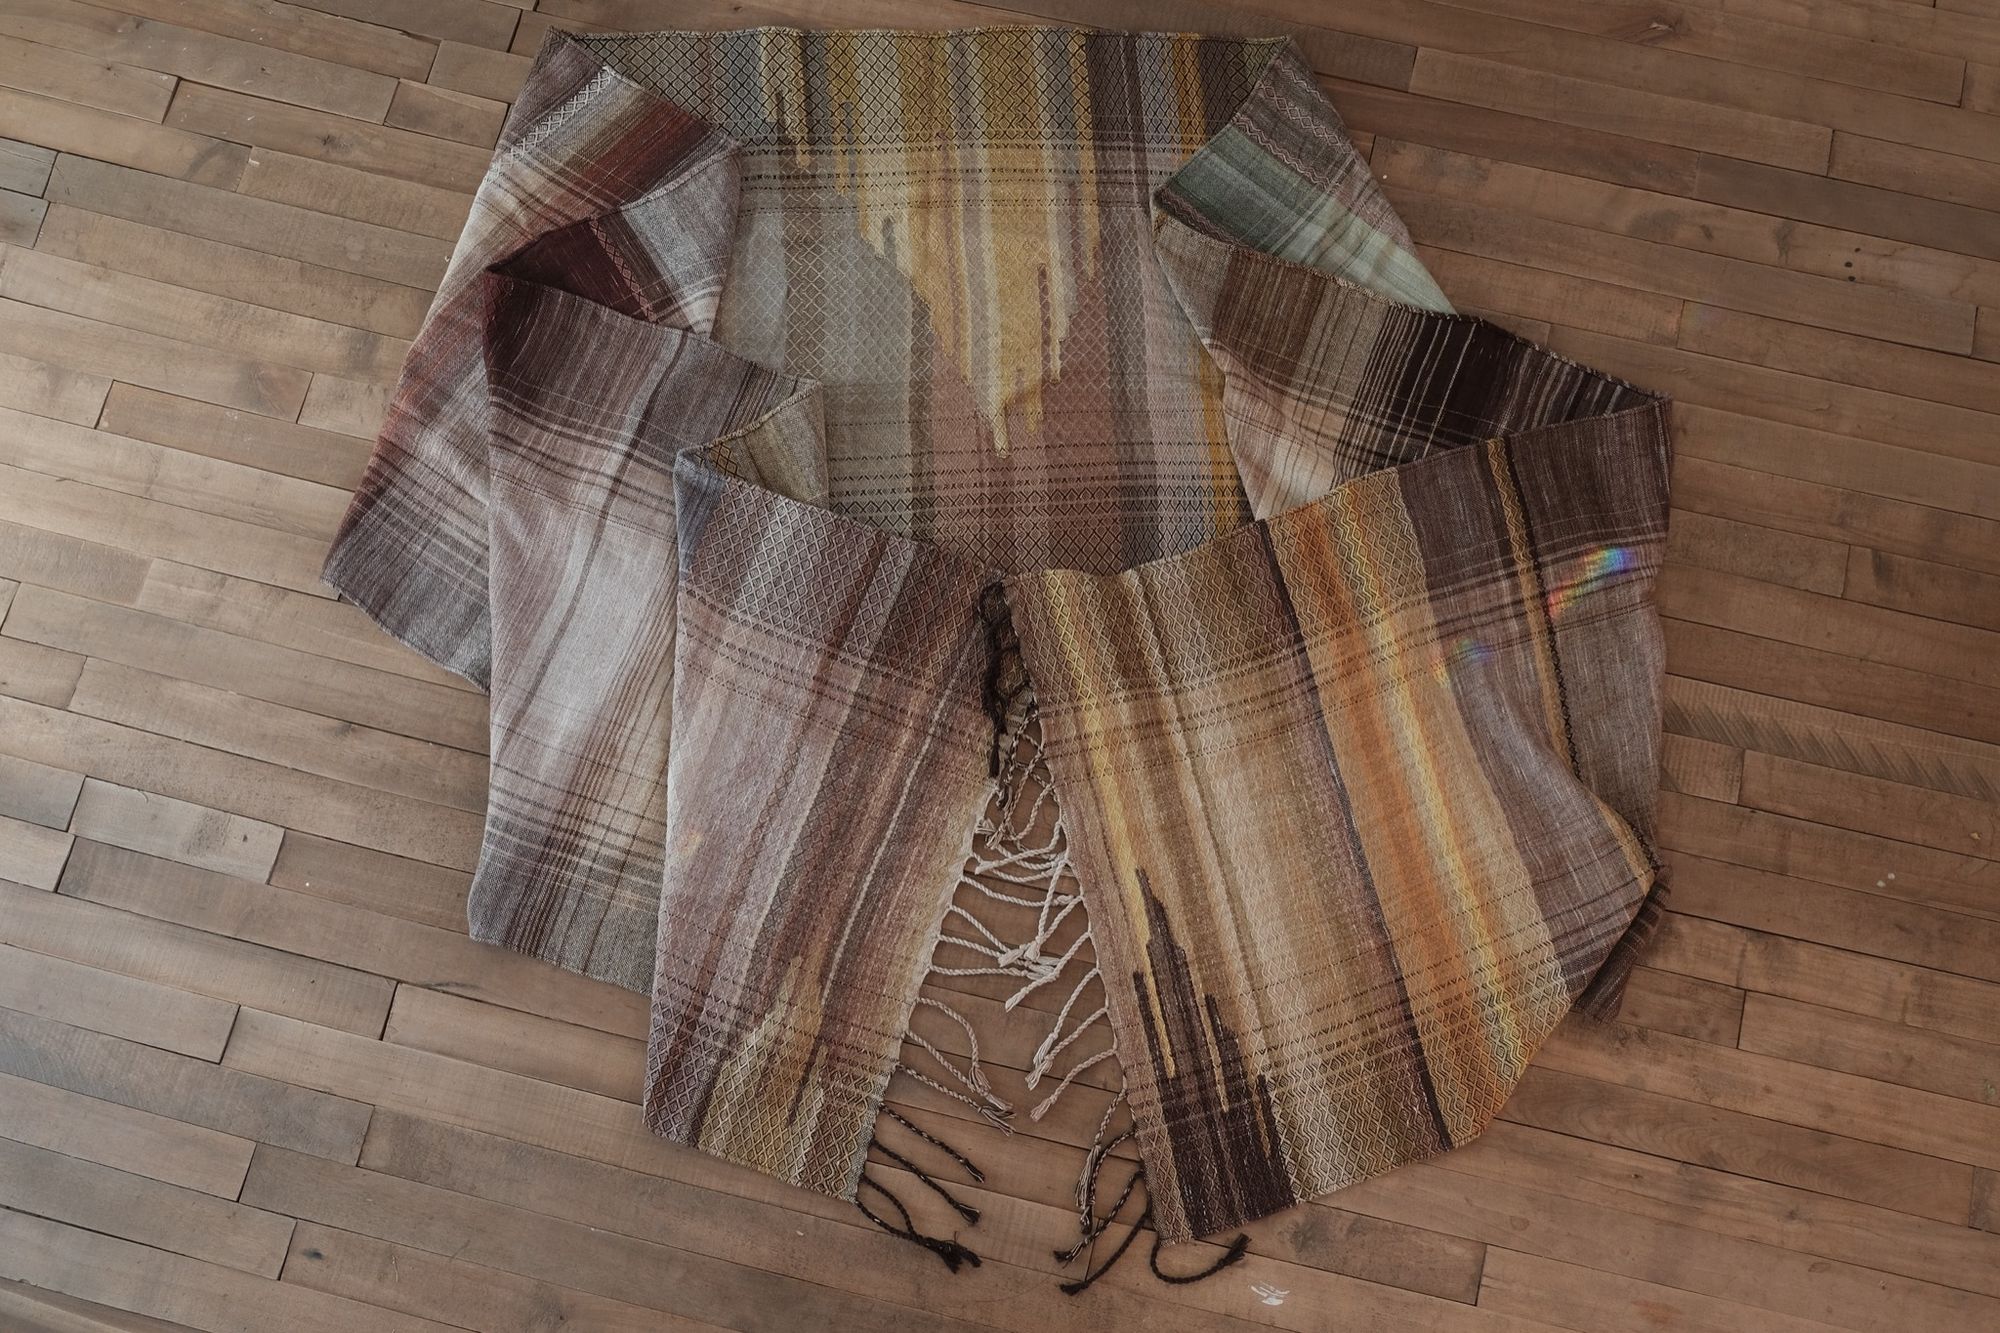 soft yellow, green, orange and brown Handwoven fabric laying on a wood floor